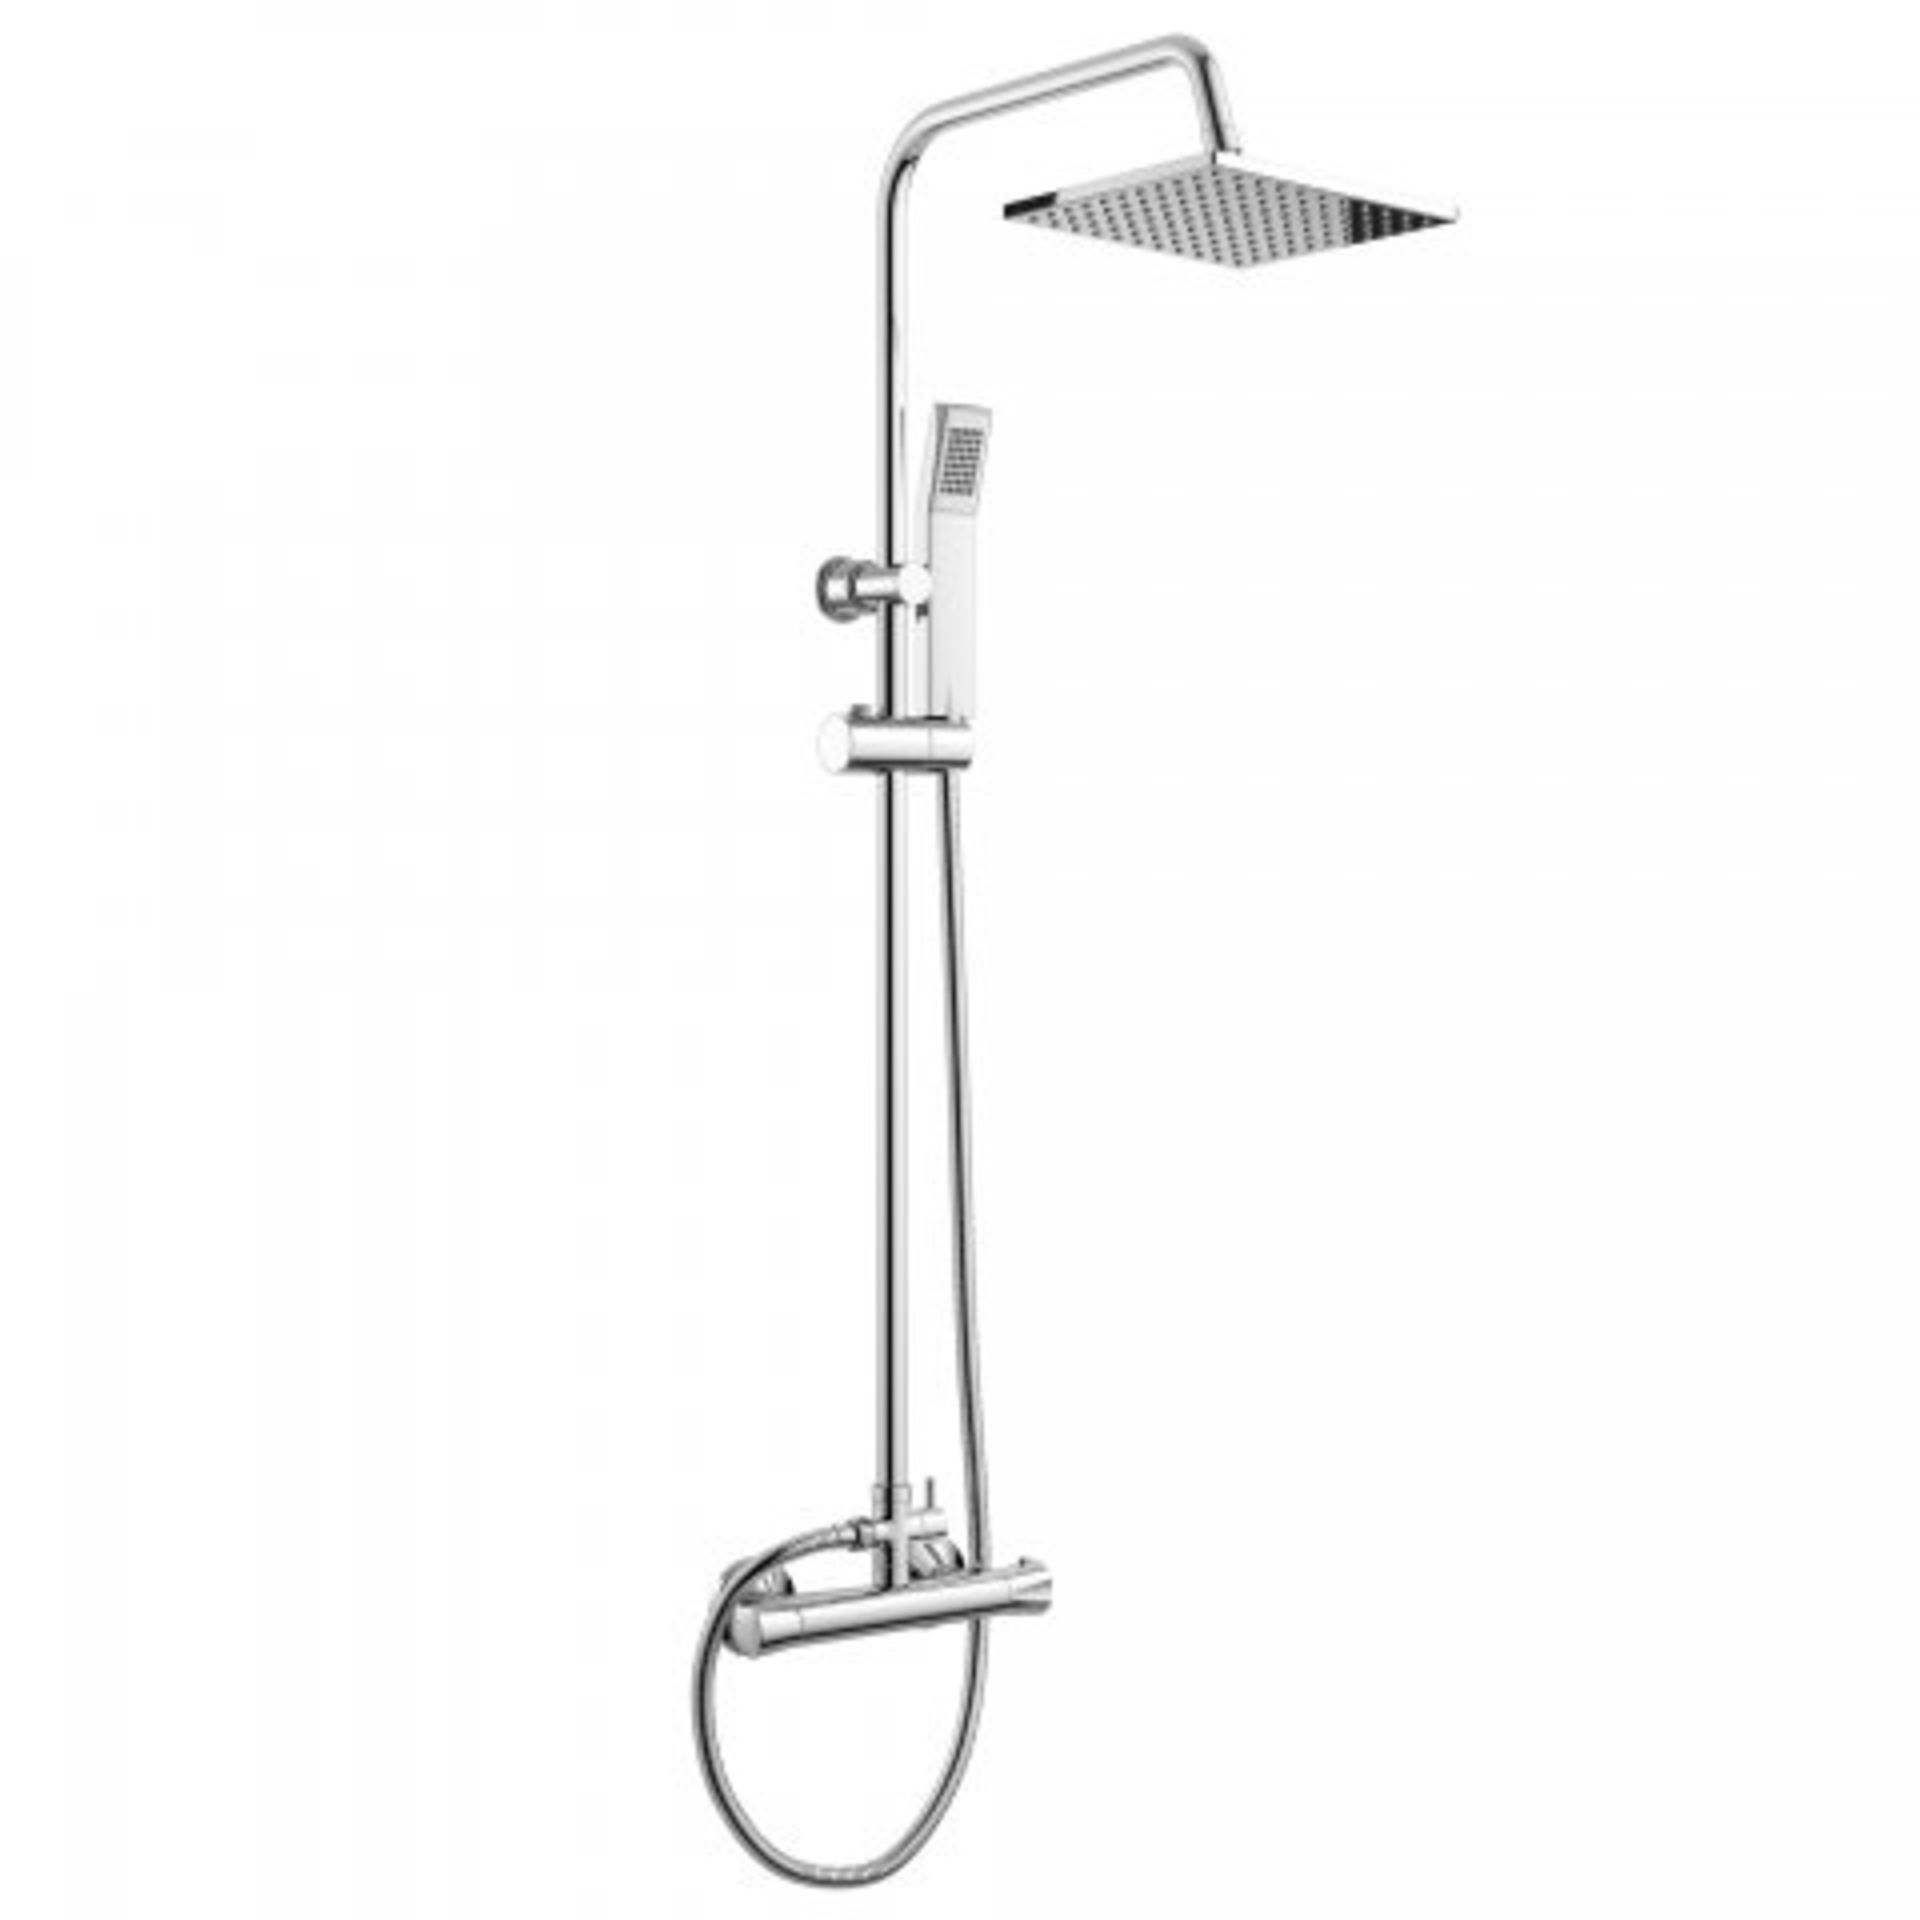 (P41) 200mm Square Head Thermostatic Exposed Shower Kit & Hand Held. RRP £249.99. Simplistic Style - Image 4 of 6